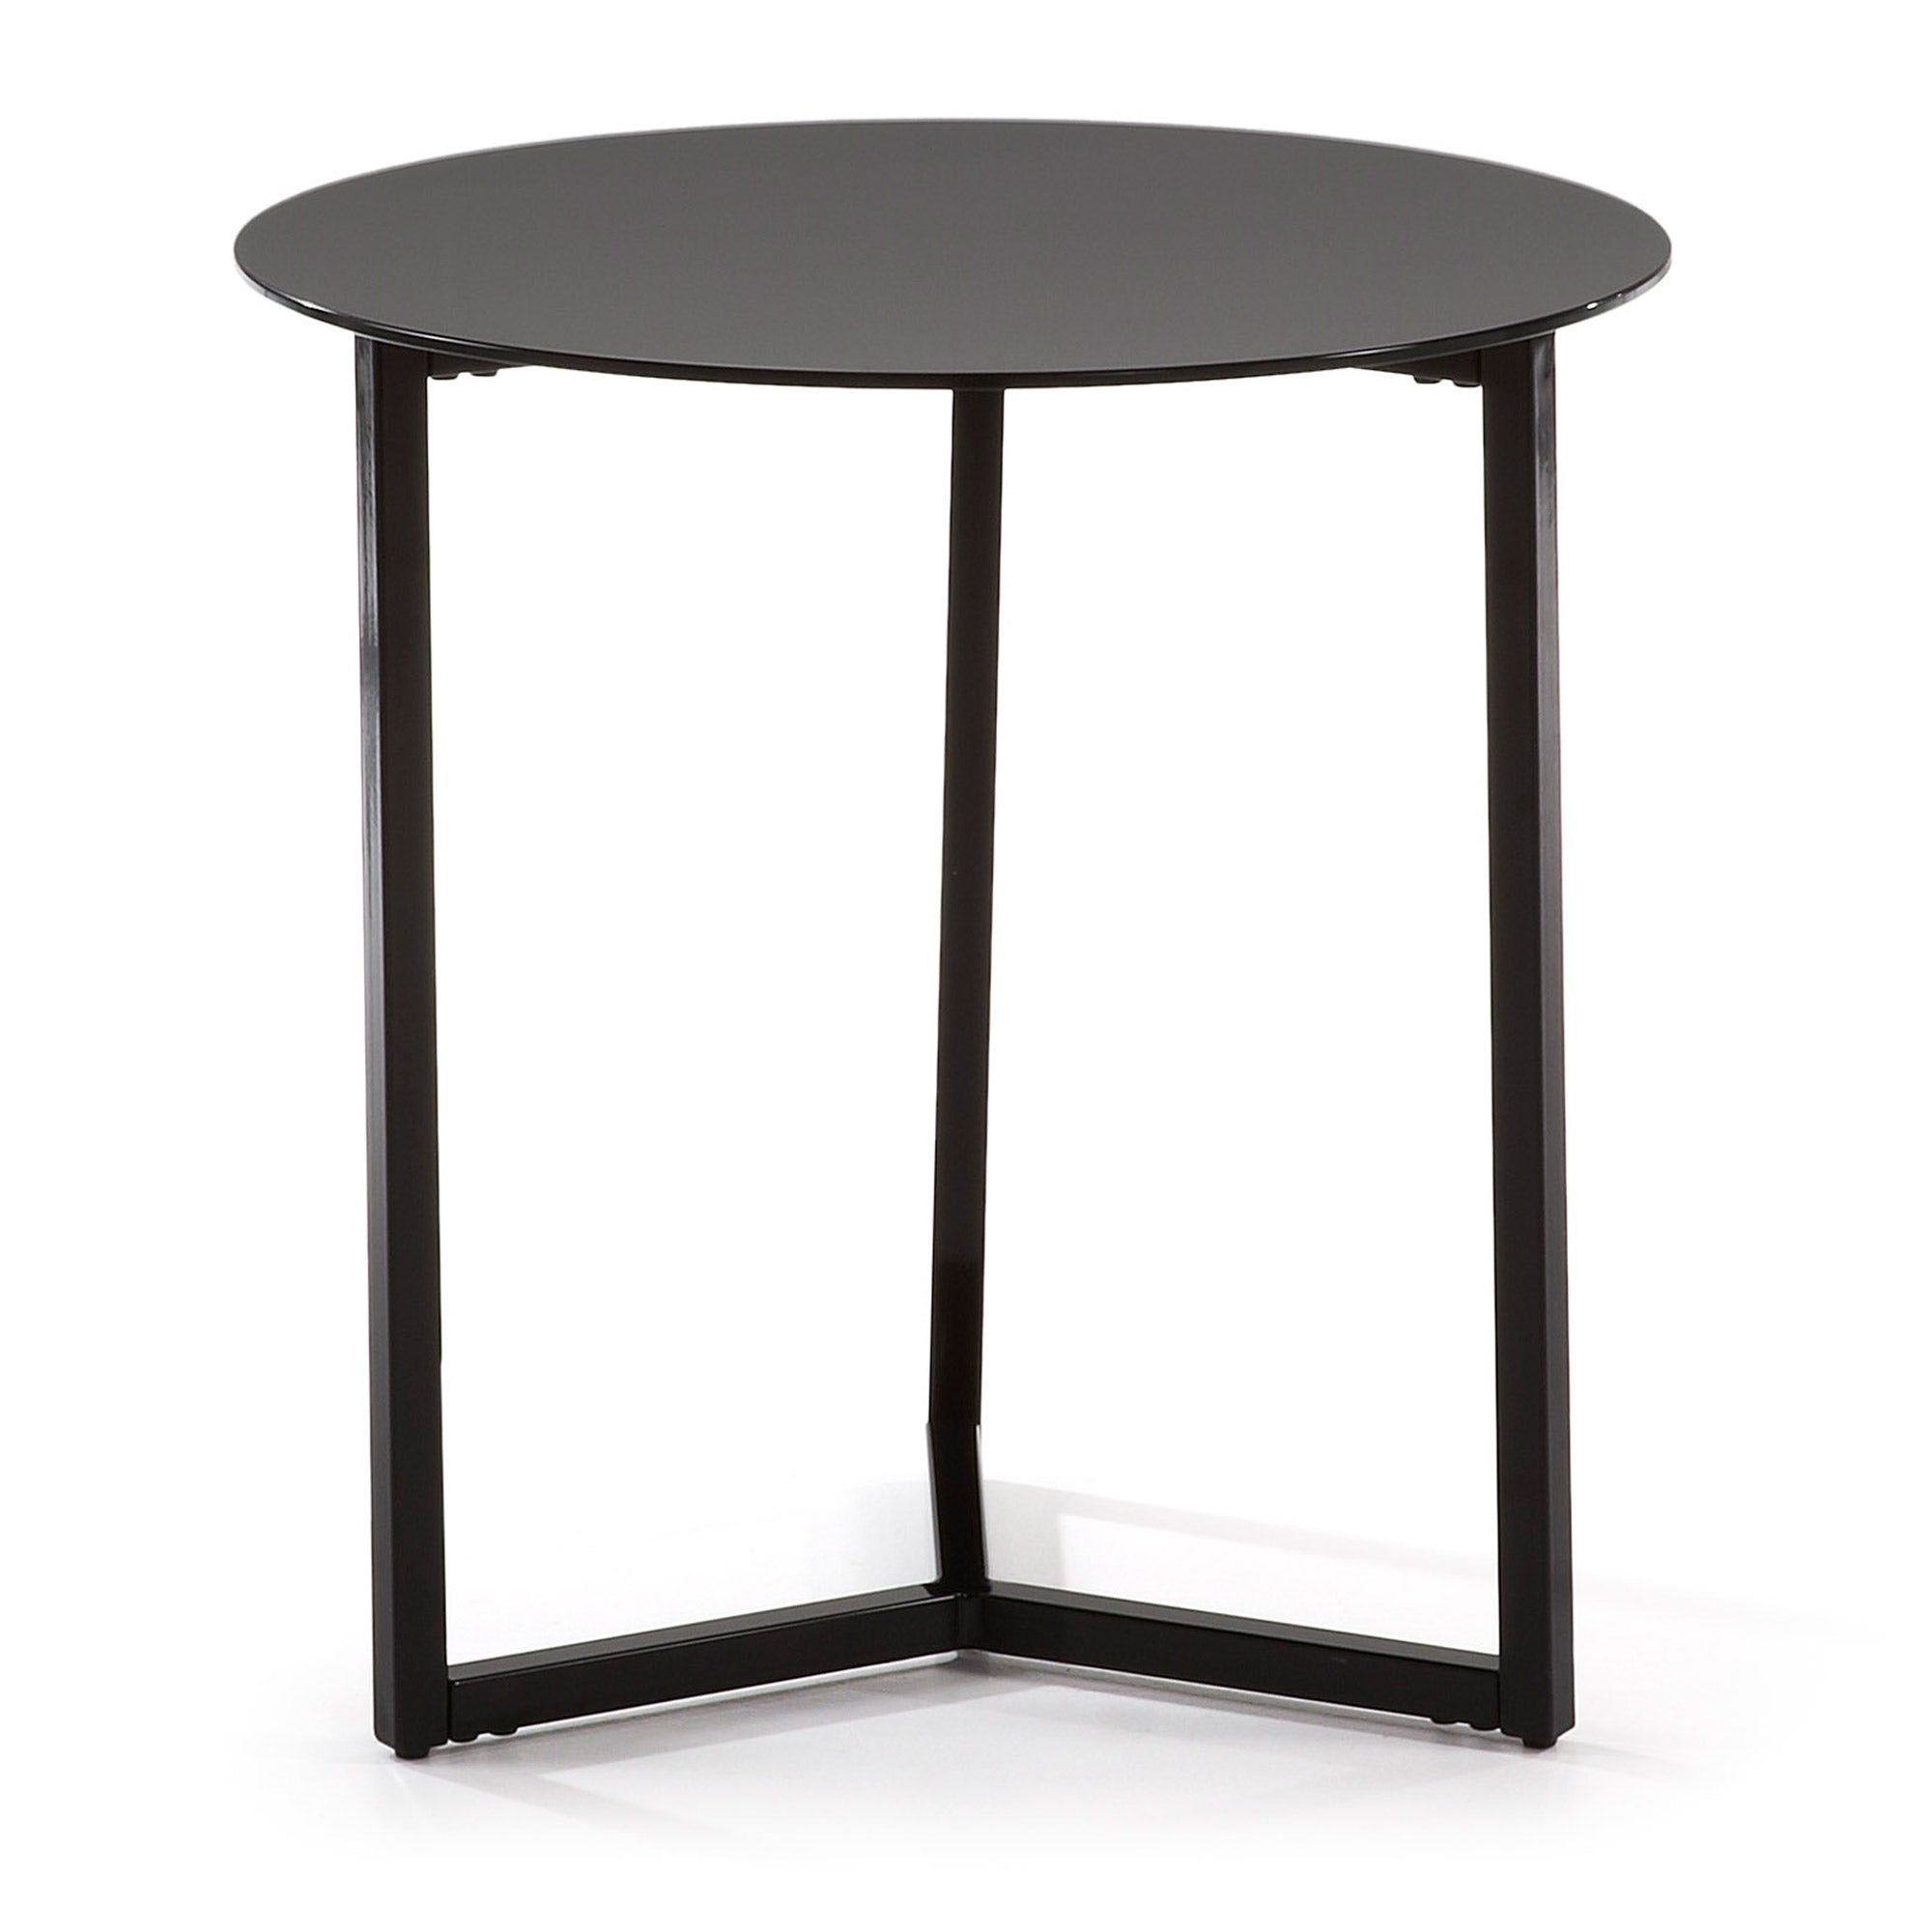 Black Raeam side table made with tempered glass and steel in black finish Ø 50 cm